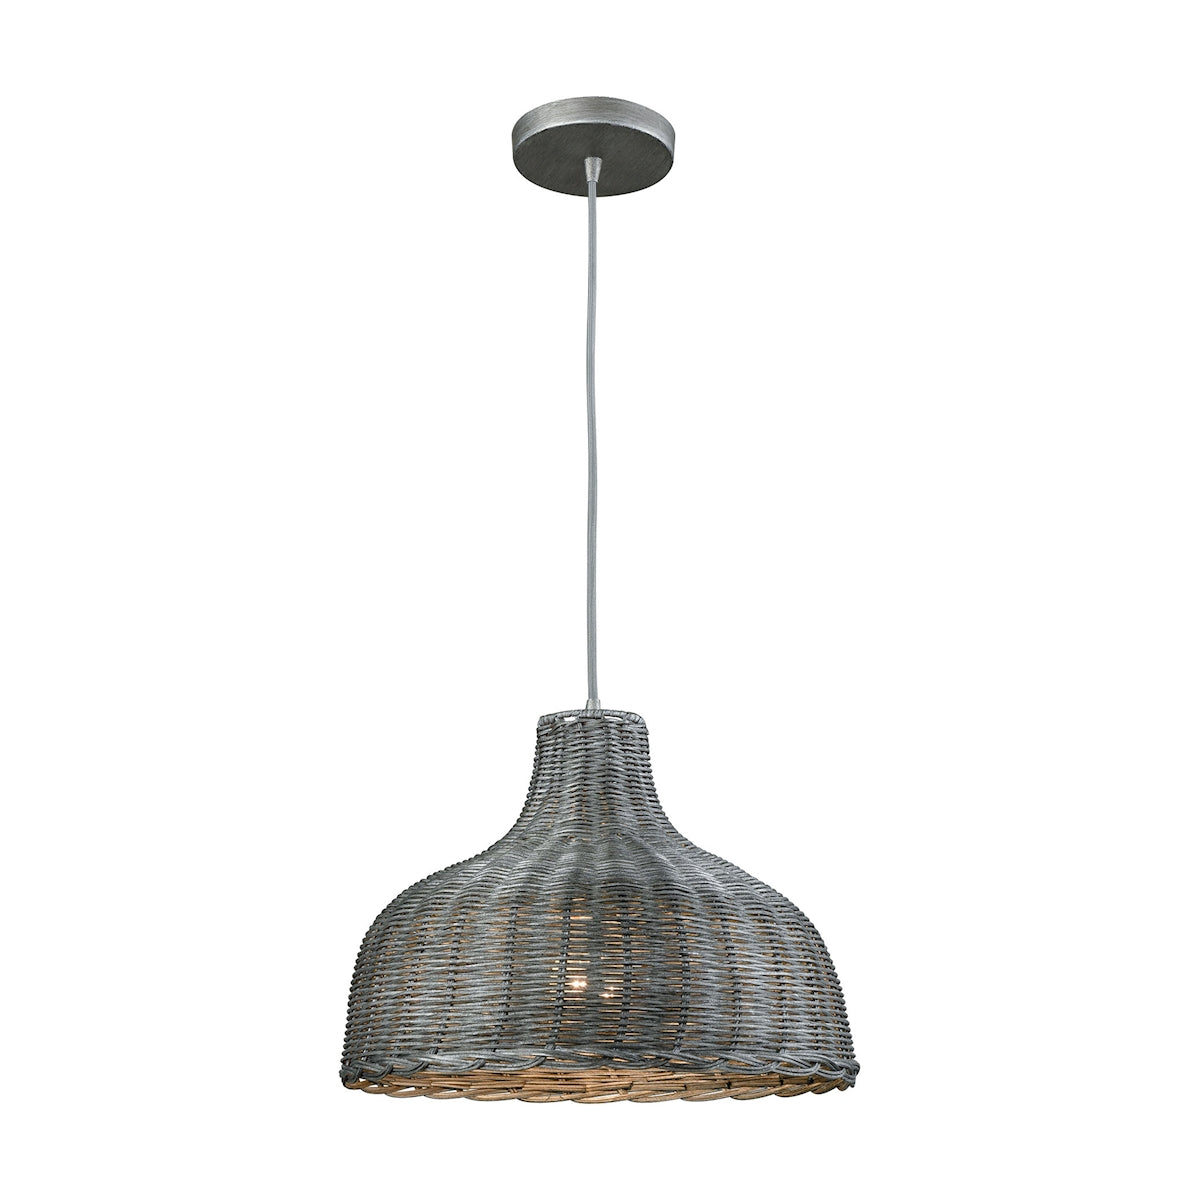 ELK Lighting 31641/1 Pleasant Fields 1-Light Pendant in Weathered Grey with Gray Wicker Shade